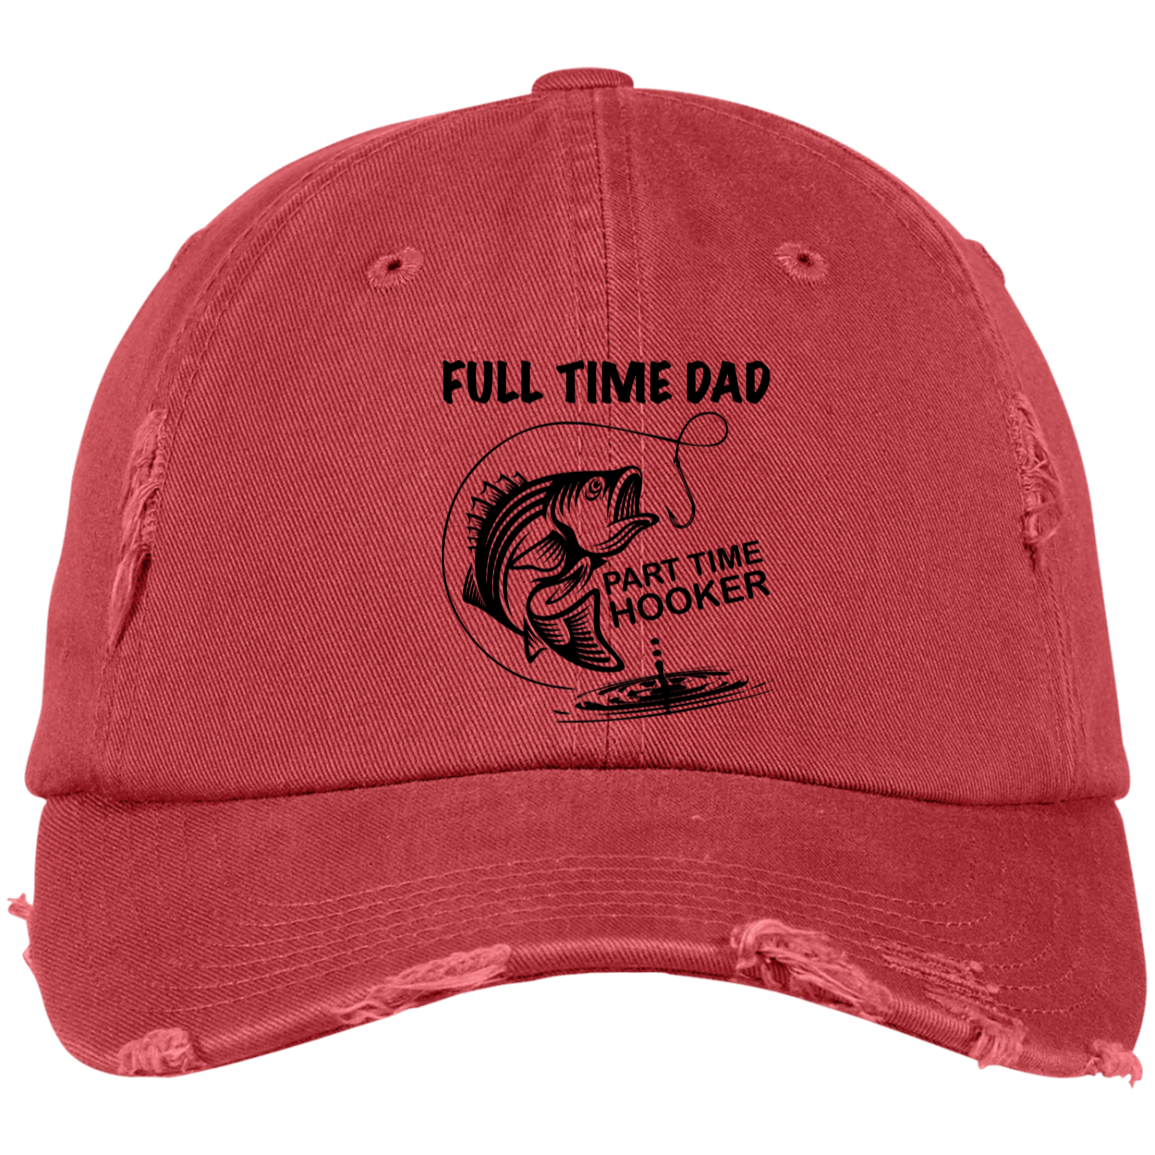 DAD Full Time Part Time Hooker Distressed Cap